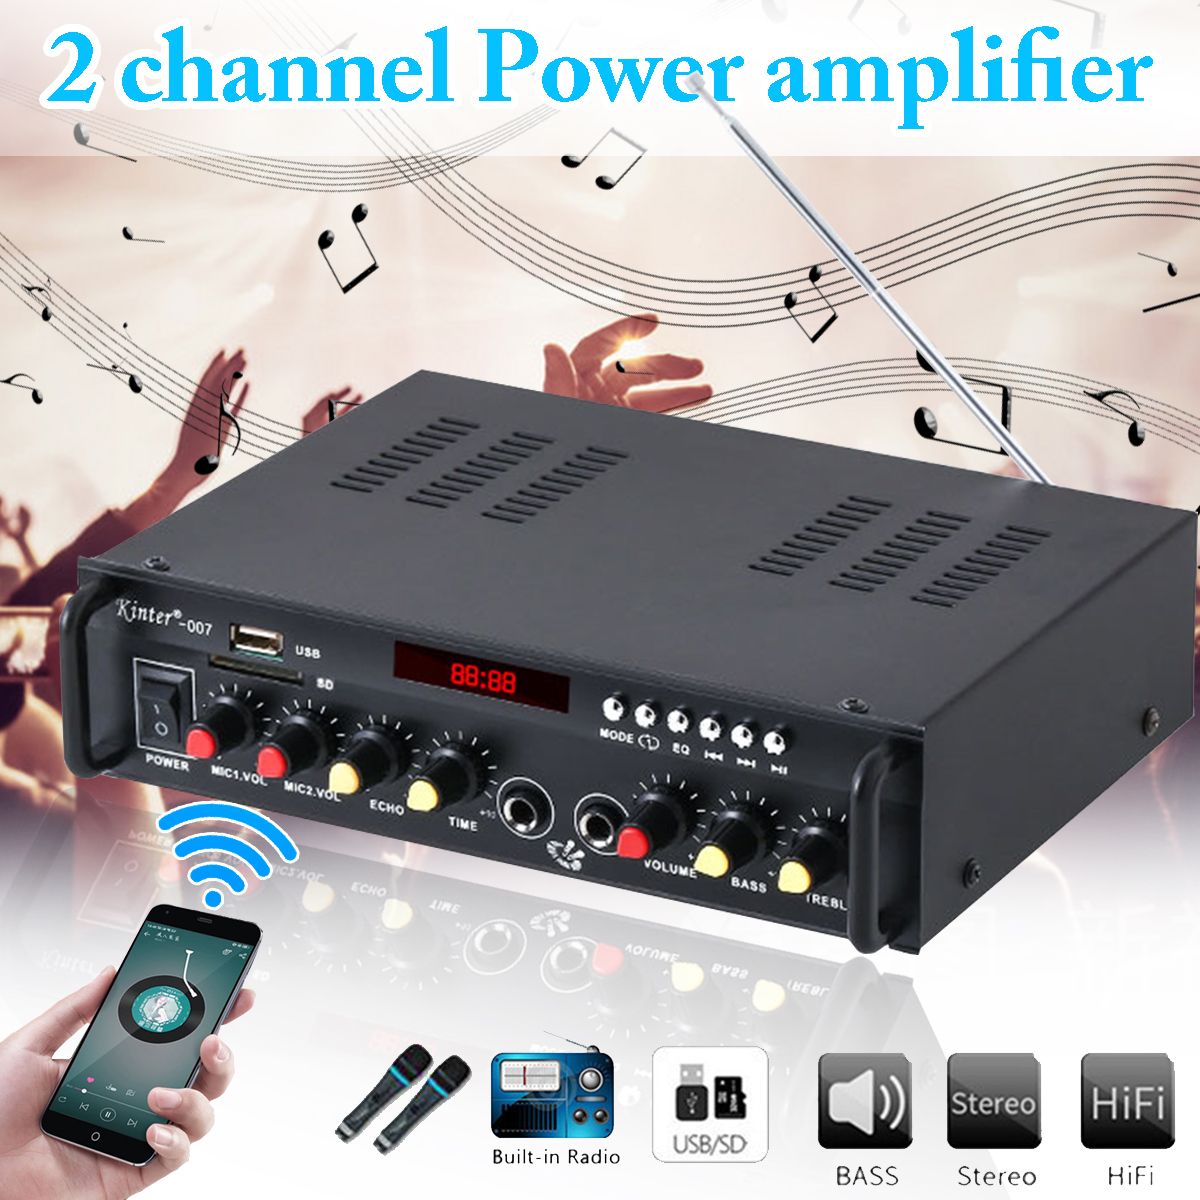 Kinter-007-2-Channel-60W-bluetooth-Power-Amplifier-AMP-Stereo-with-Remote-Control-Digital-Amp-1594318